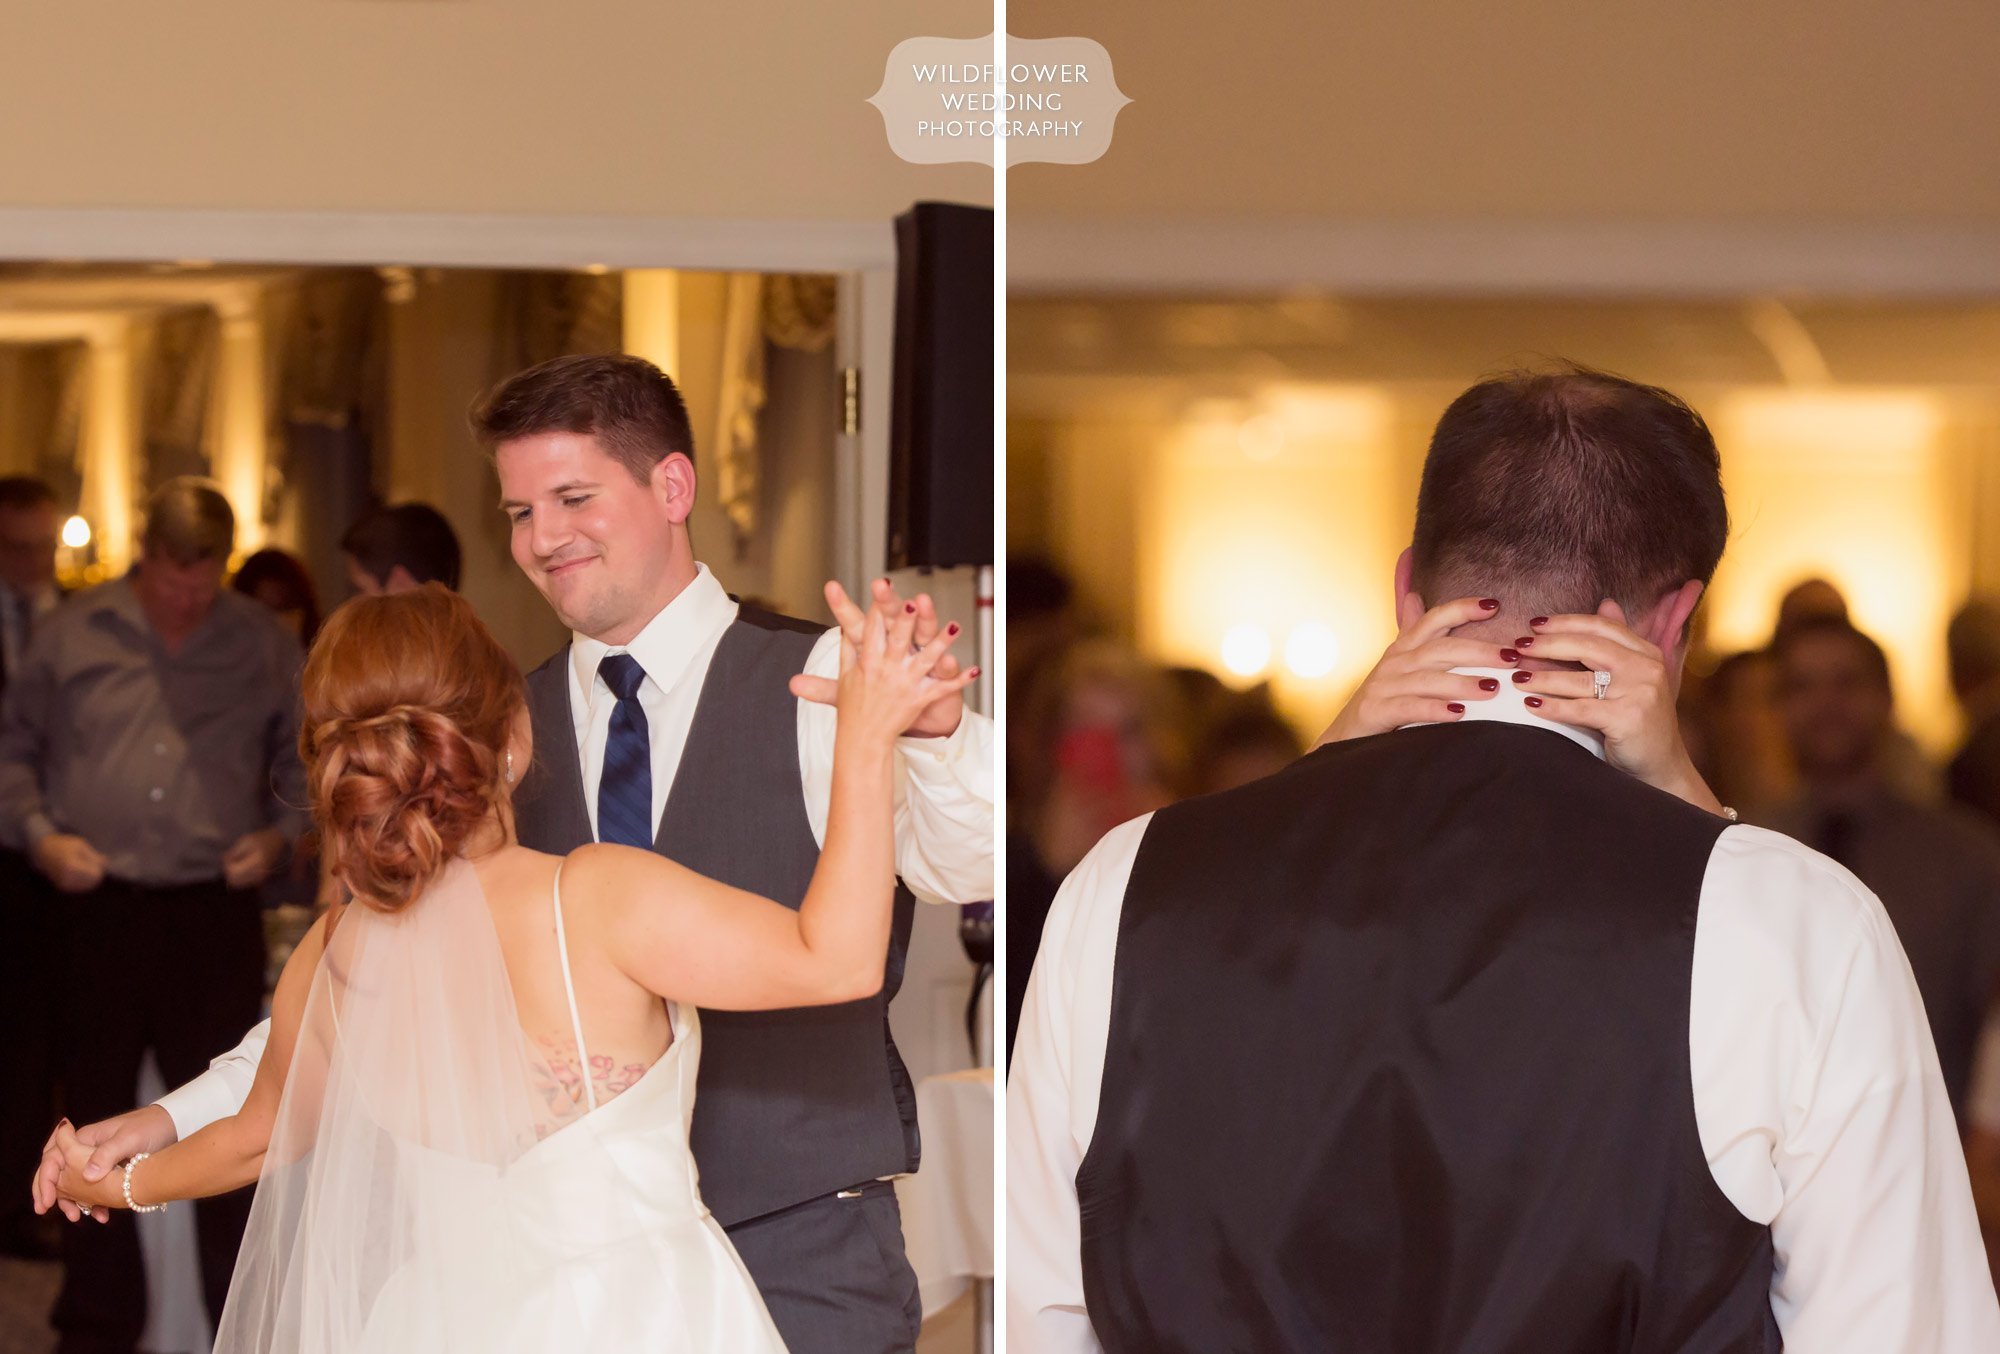 Bride and groom have their first dance at their wedding reception in October at JCCC.